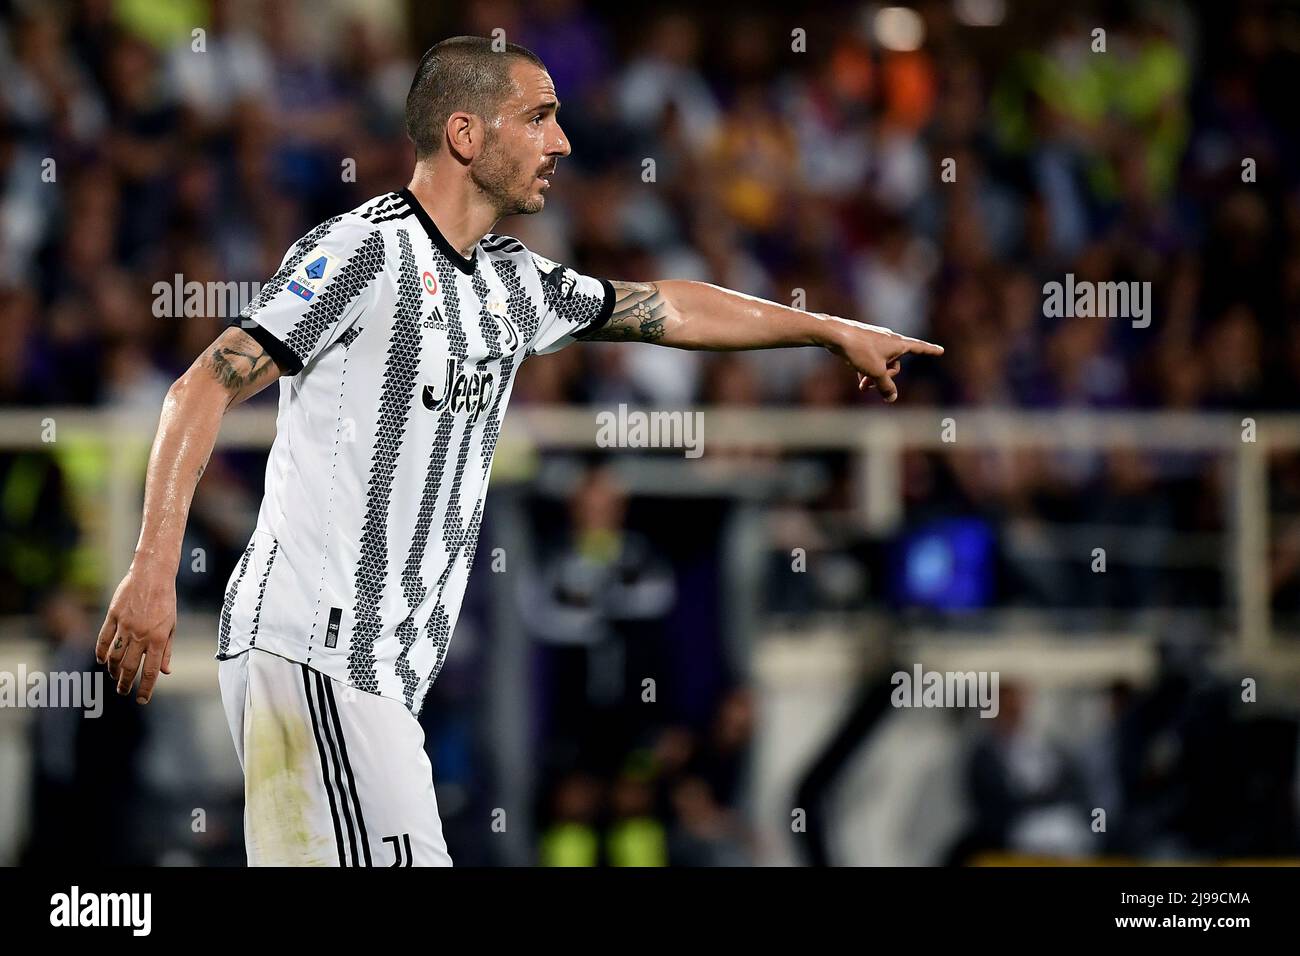 Florence, Italy. 21st May, 2022. Leonardo Bonucci of Juventus FC reacts during the Serie A 2021/2022 football match between ACF Fiorentina and Juventus FC at Artemio Franchi stadium in Florence (Italy), May 21th, 2022. Photo Federico Tardito/Insidefoto Credit: insidefoto srl/Alamy Live News Stock Photo